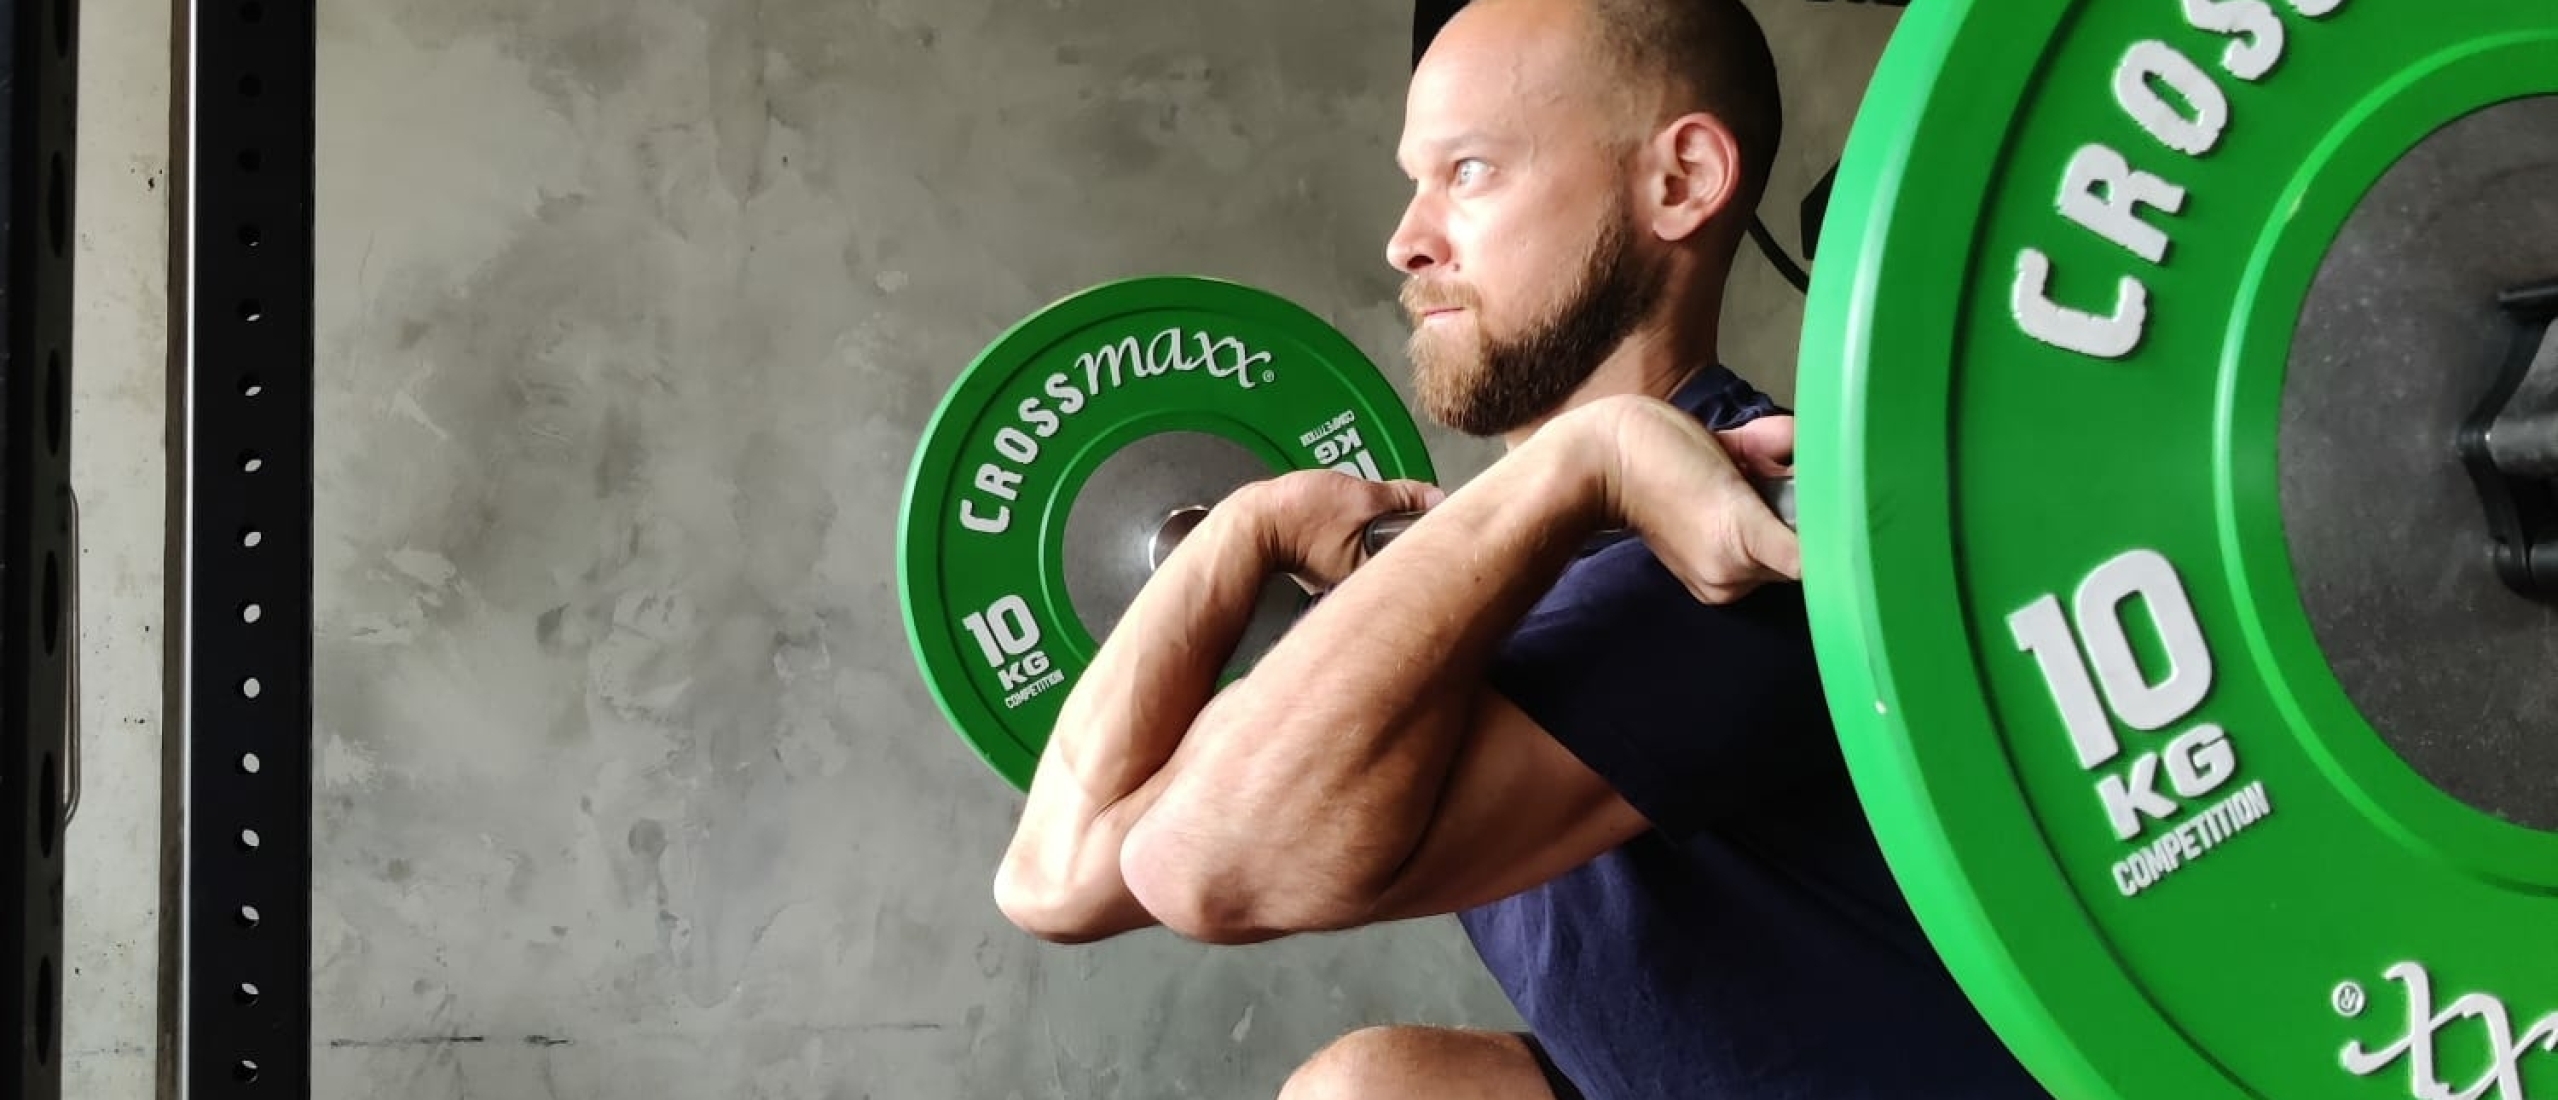 Personal trainer: Menno Wels